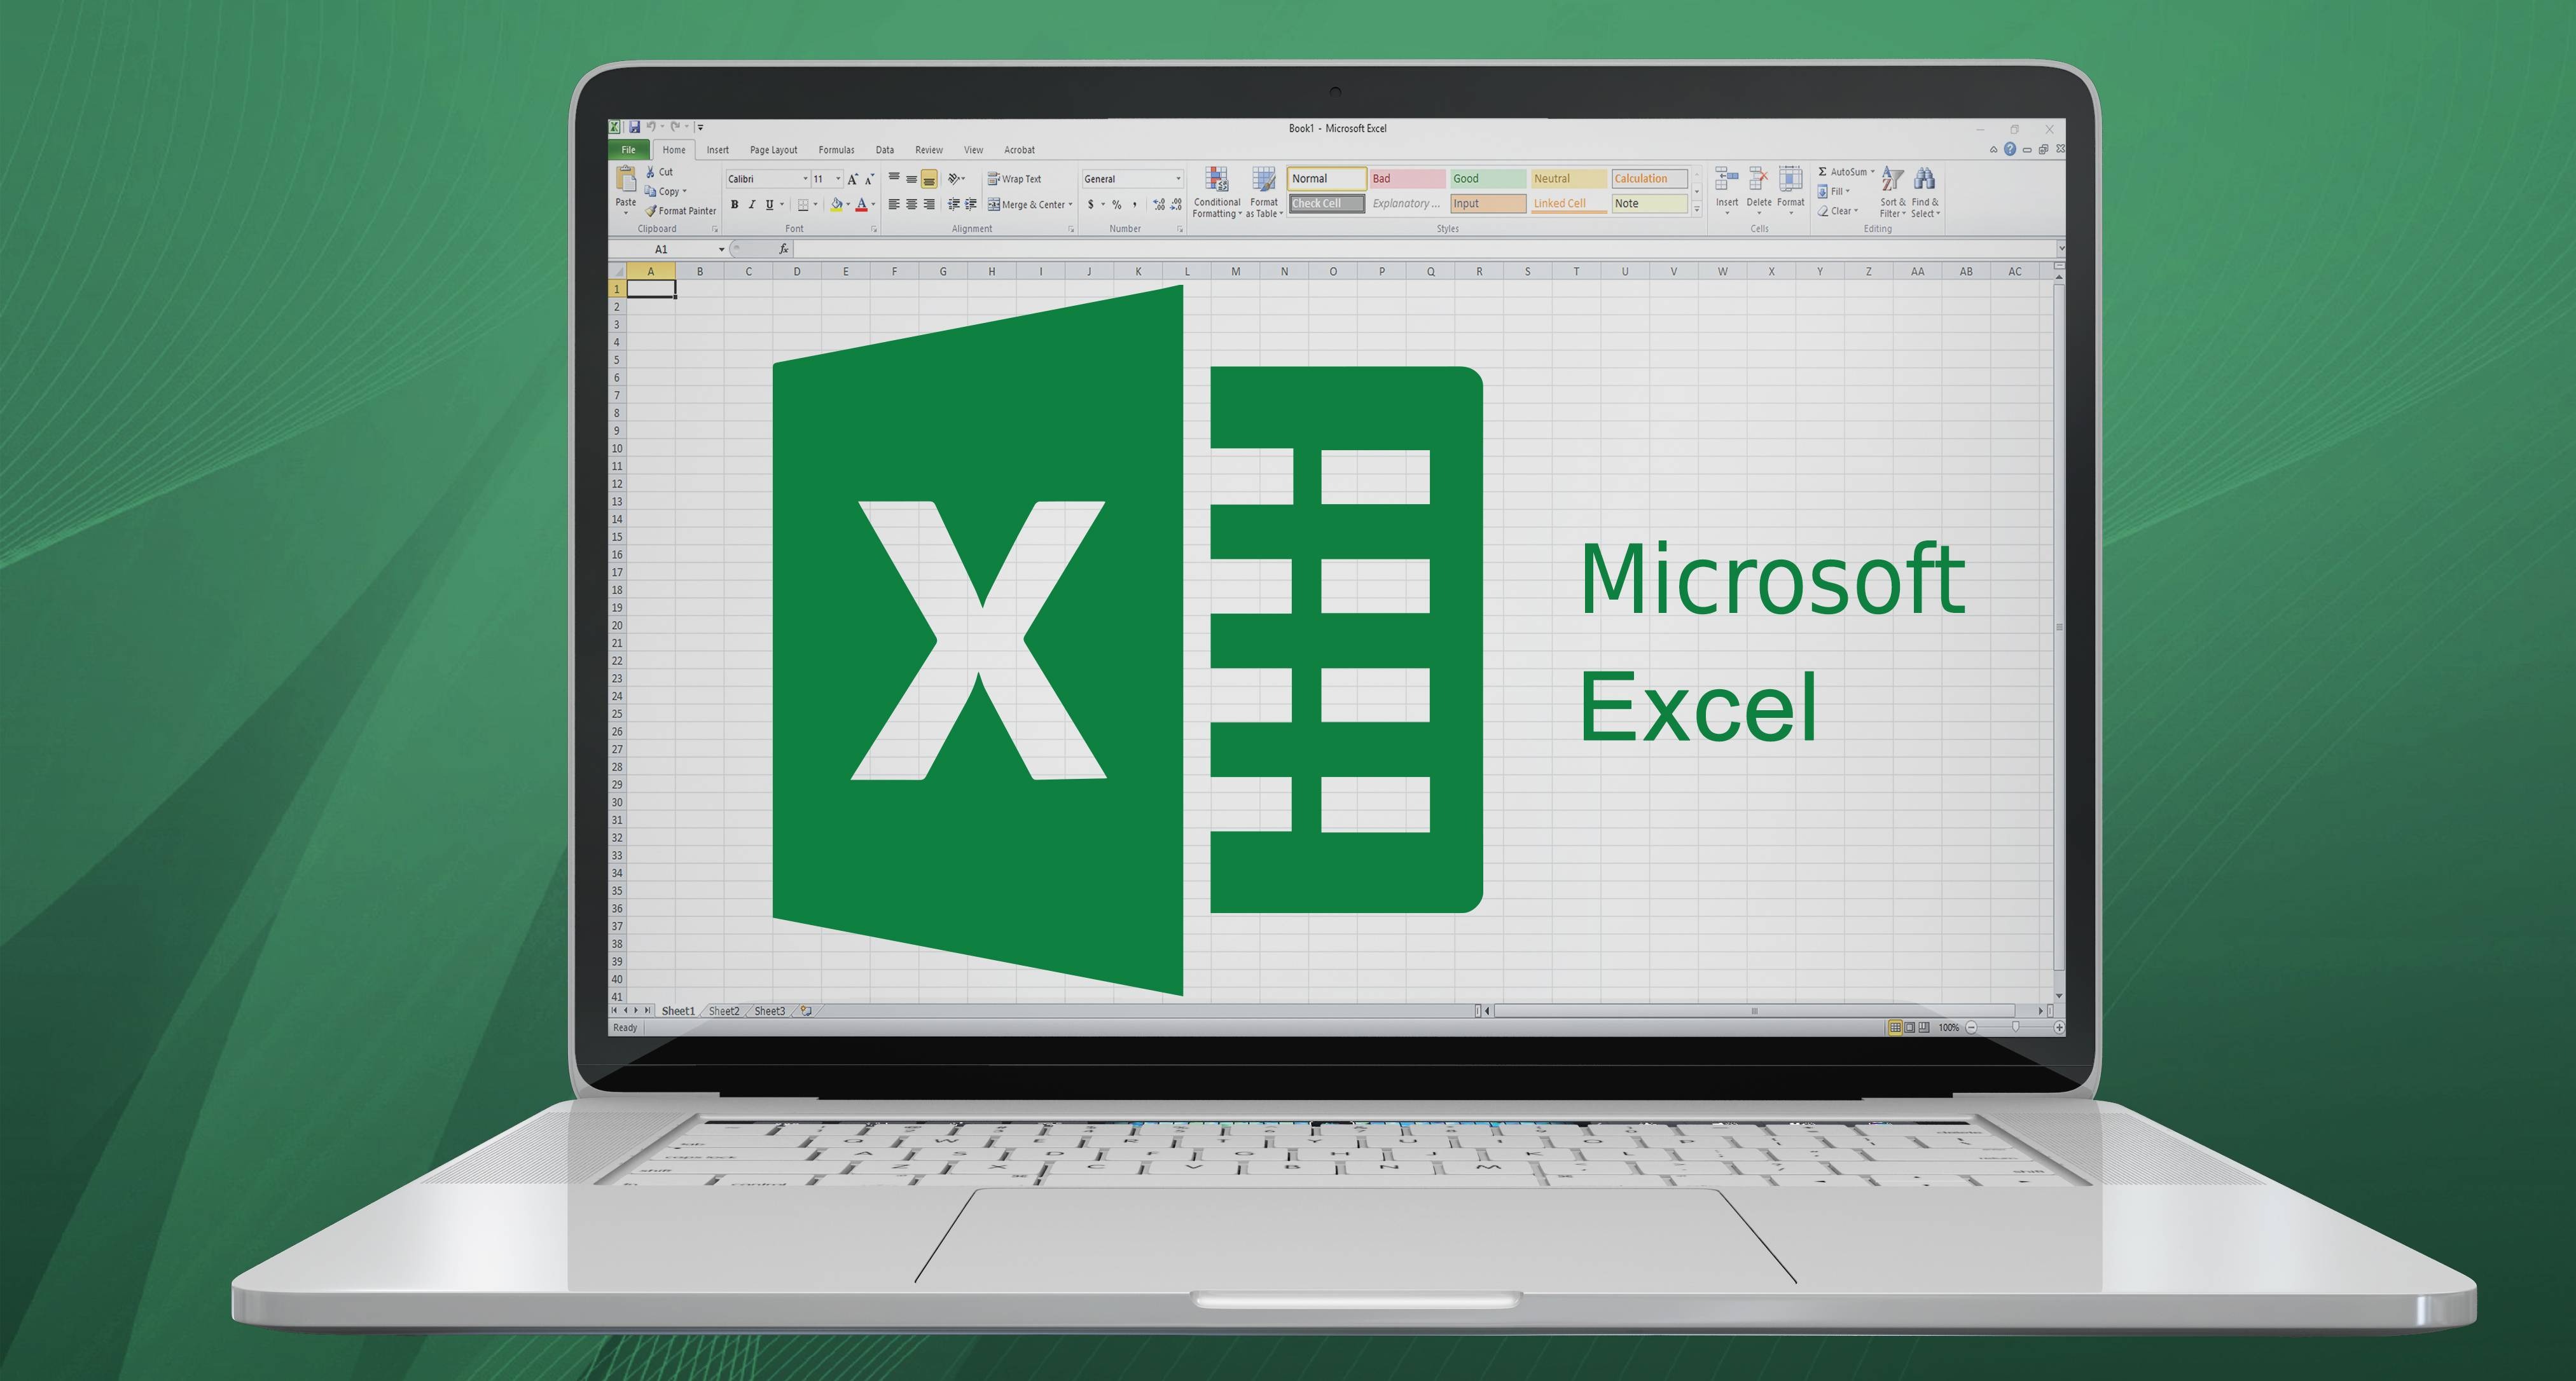 What Is Microsoft Excel And What Does It Do?